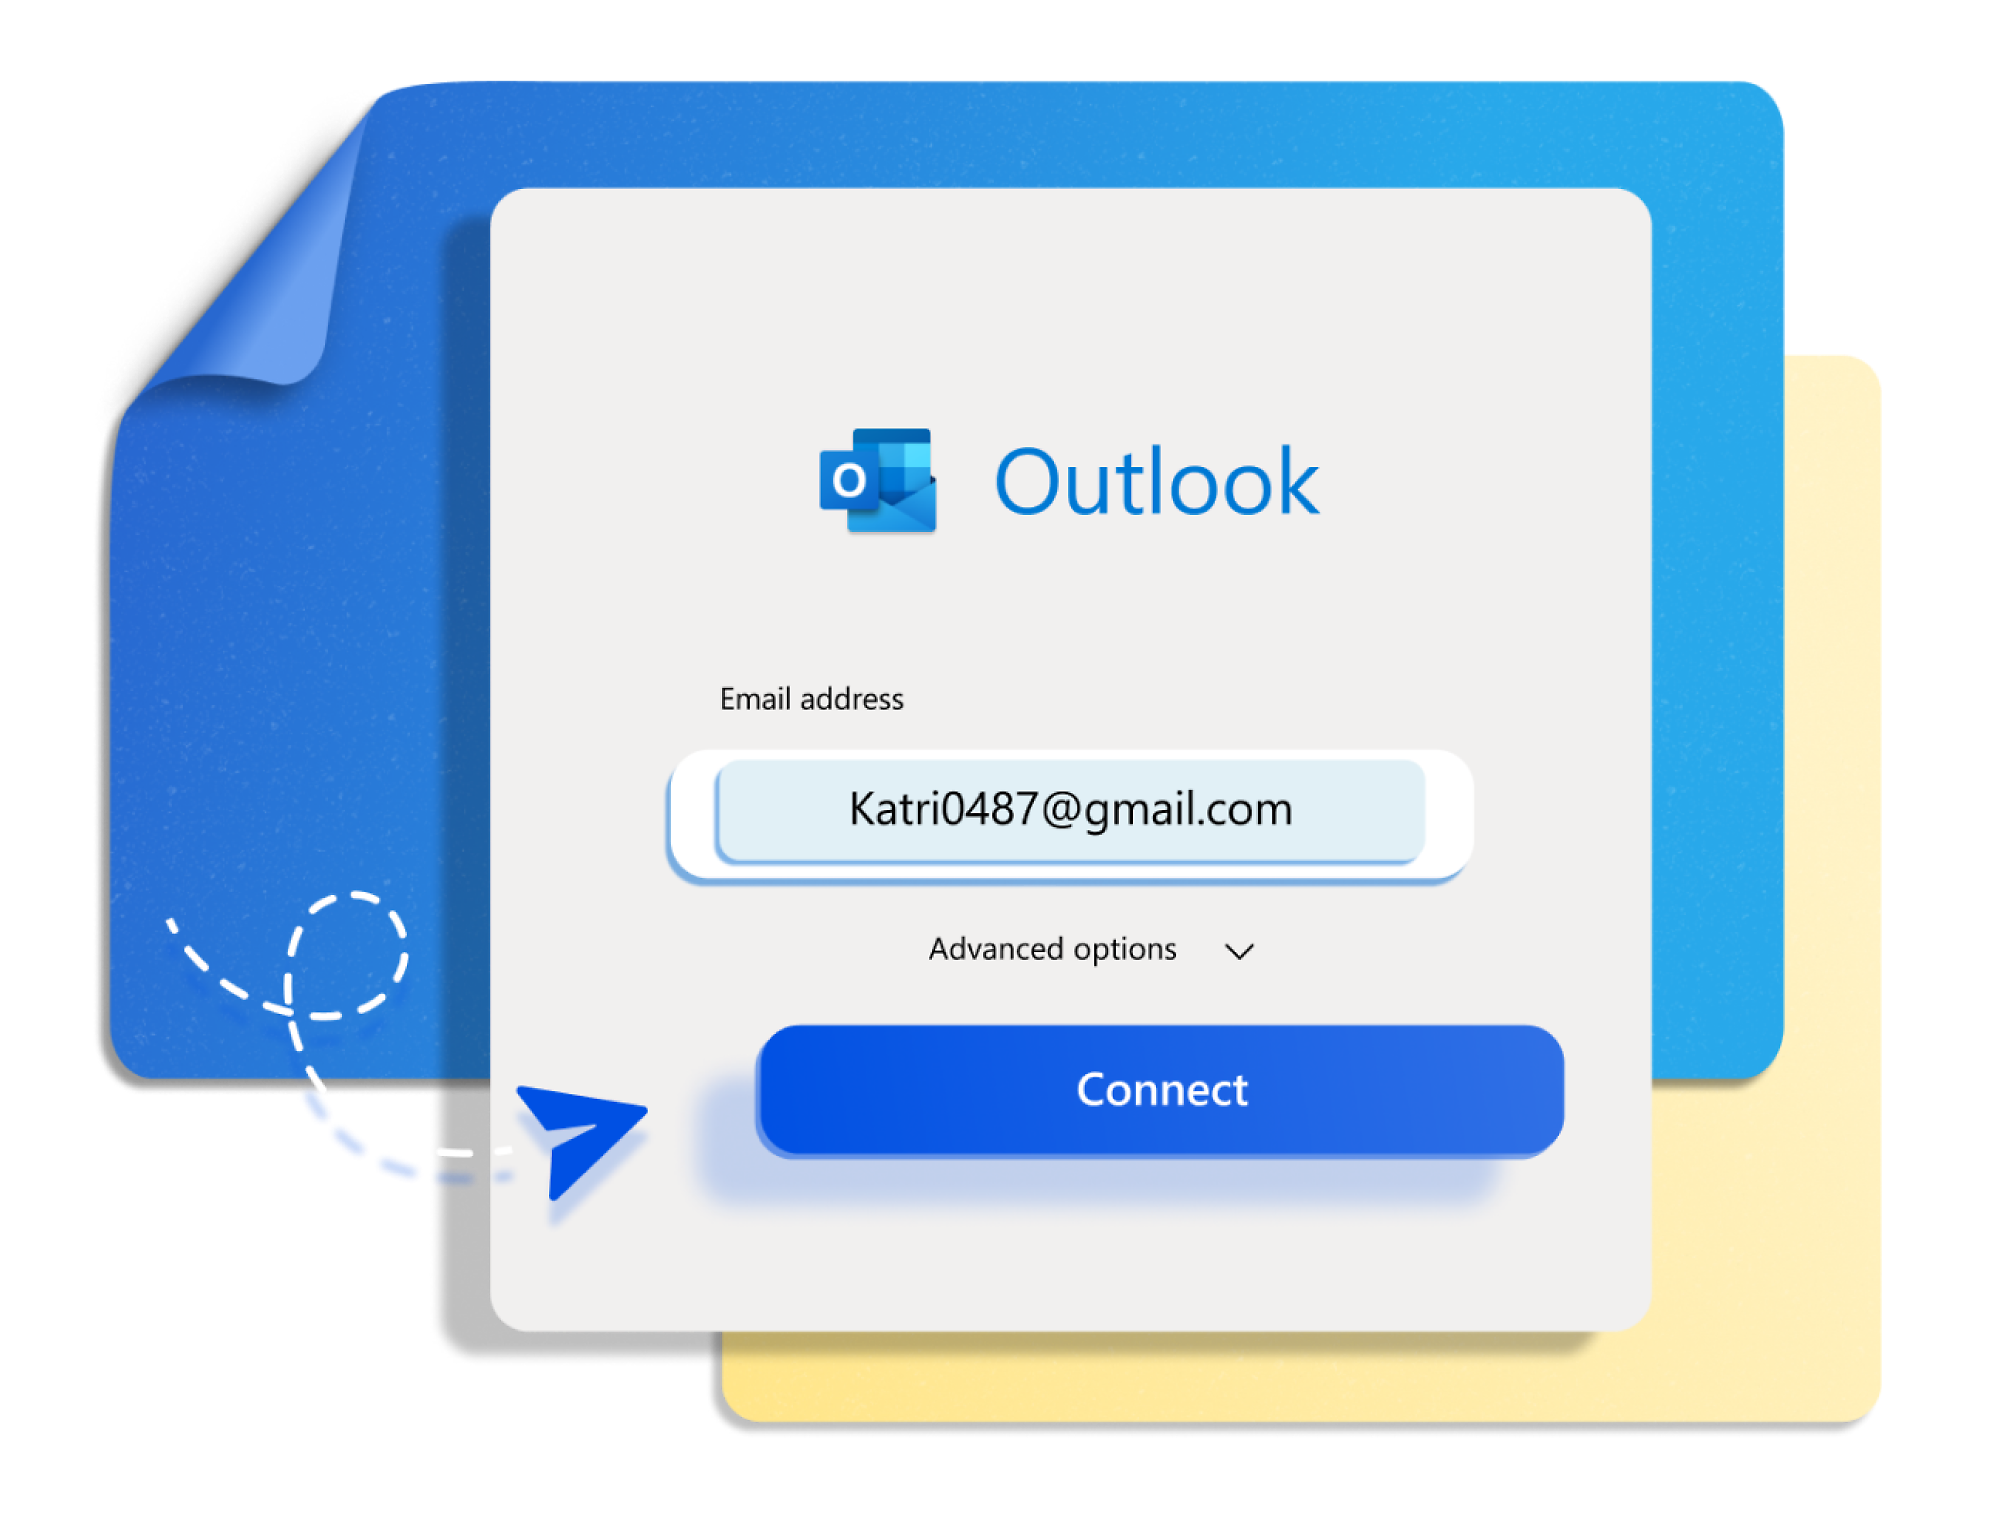 A screenshot of email address on the Outlook login page